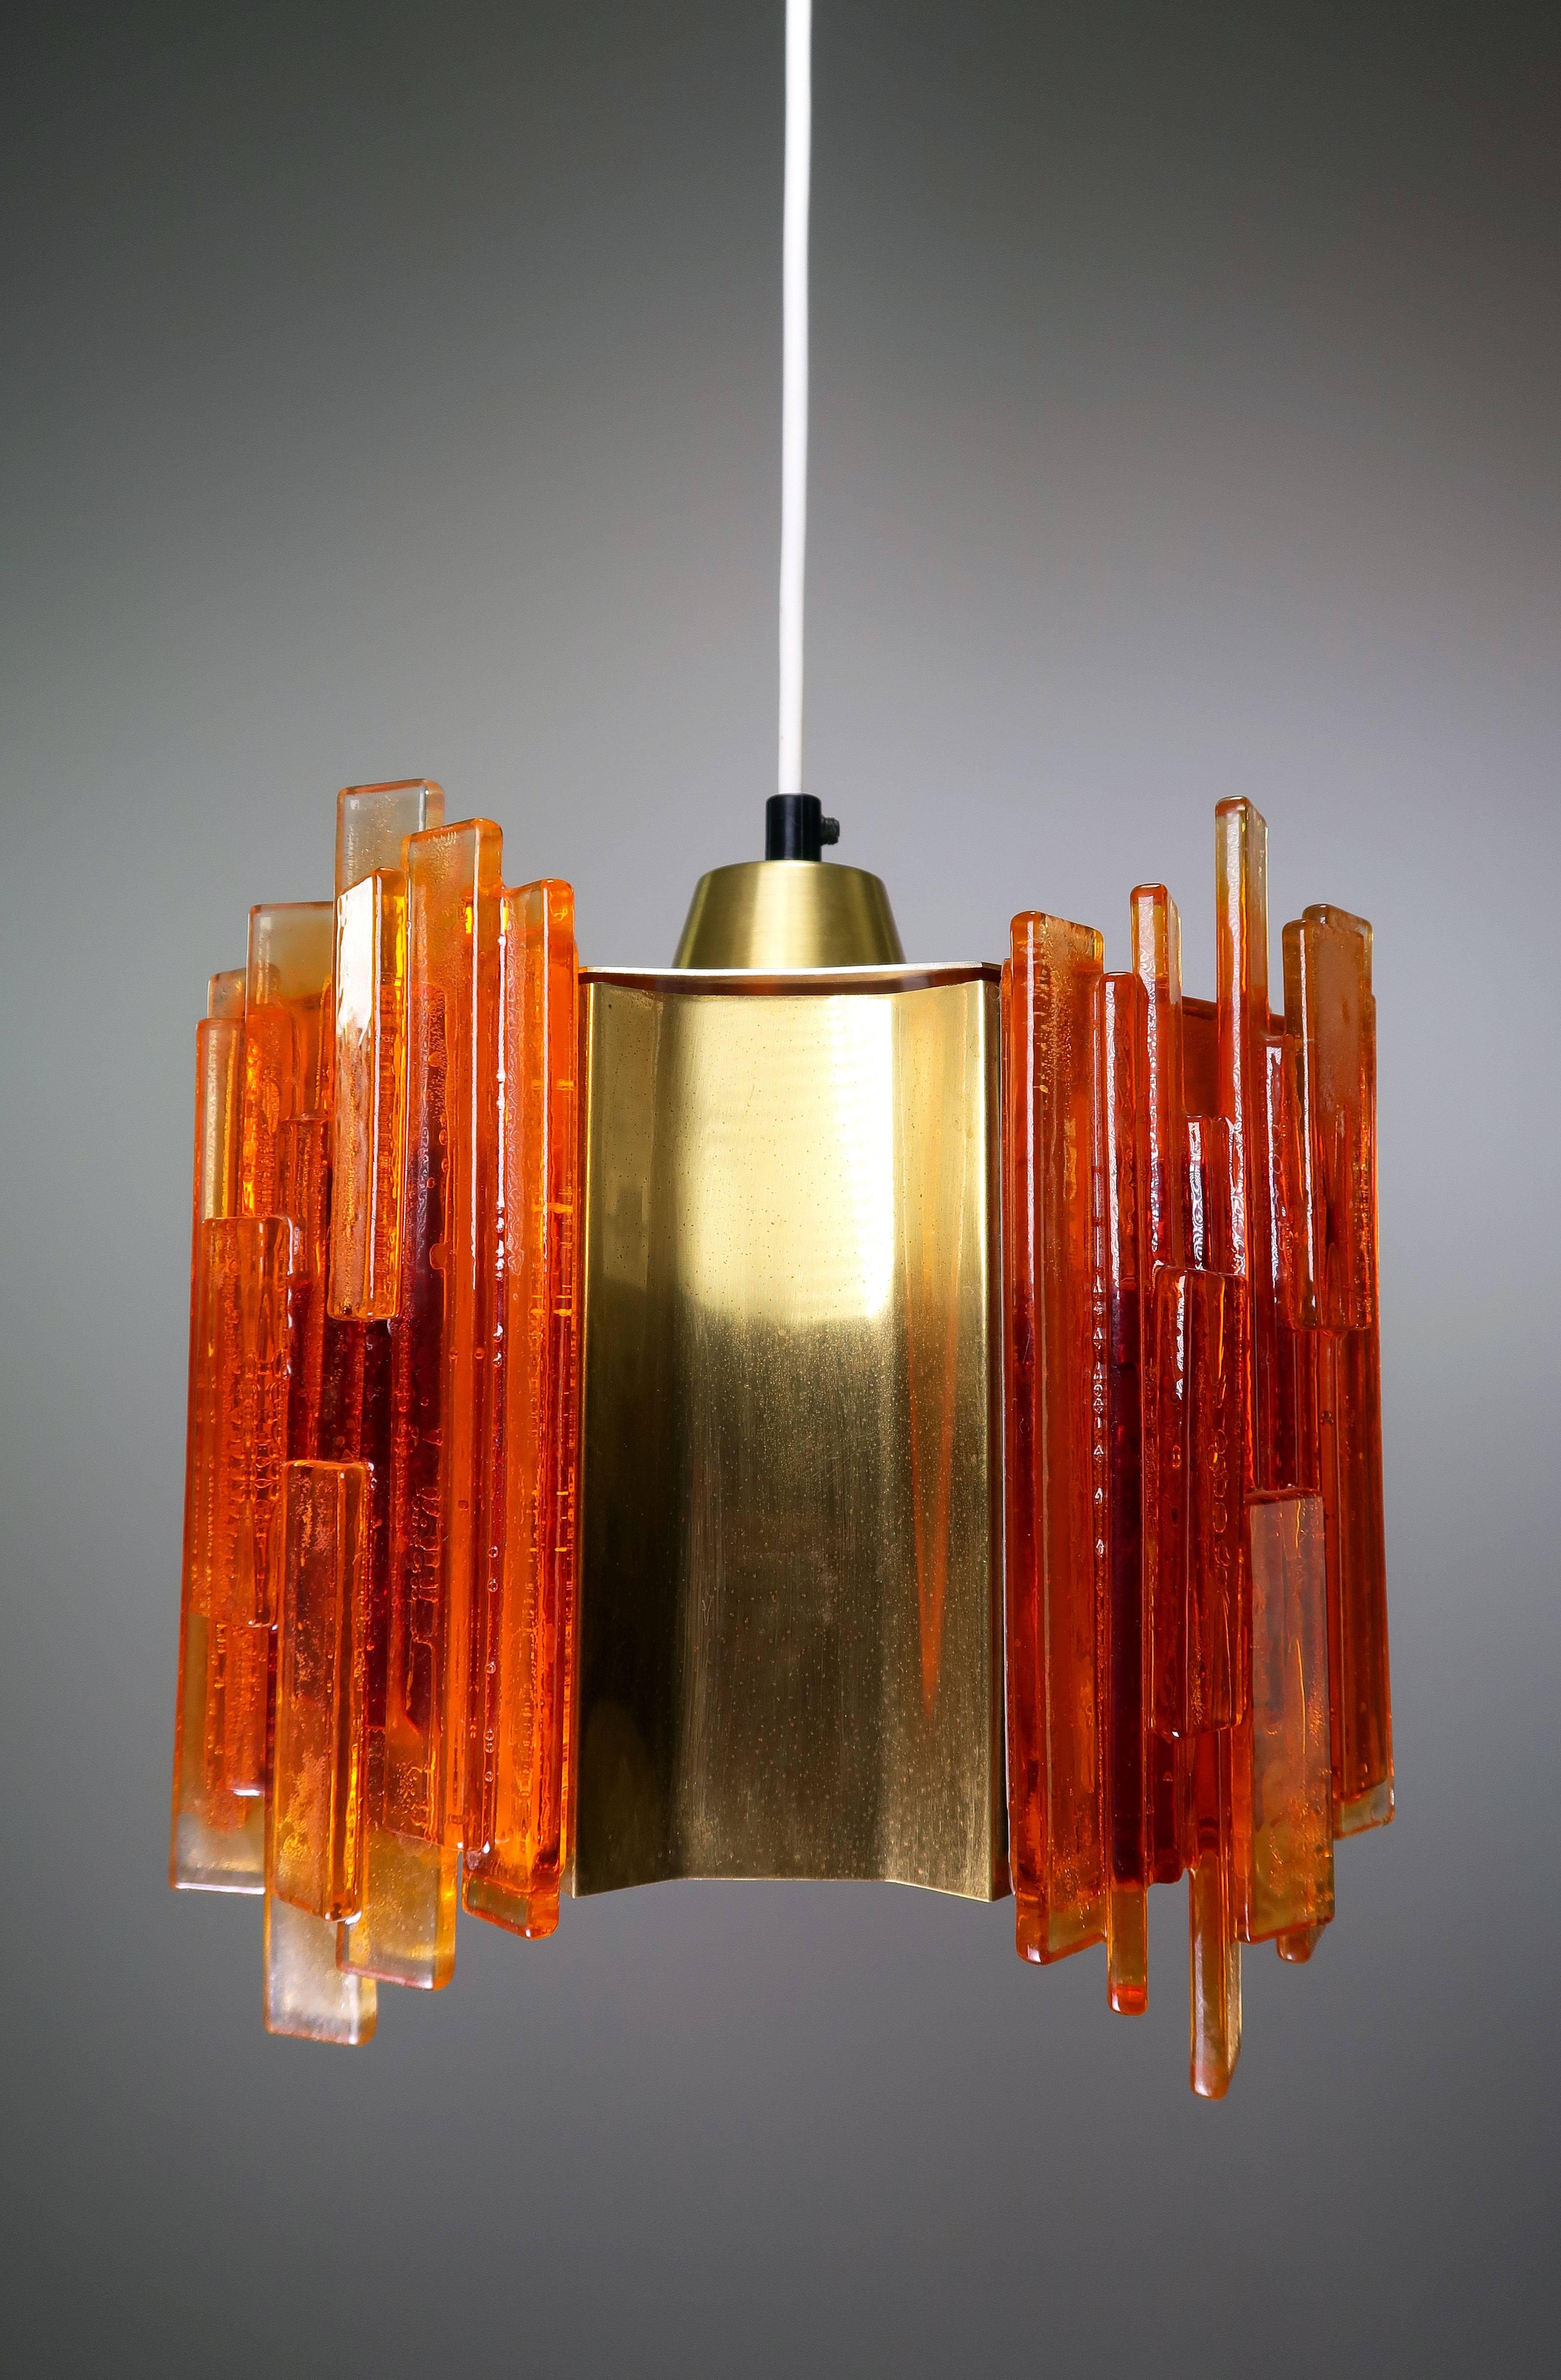 Danish Mid Century Scandinavian Modern Space Age octagon shaped pendant with four concave brass pieces intermixed with four orange acrylic pieces composed of many rectangular acrylic sticks arranged on top of each other to create a unique geometric